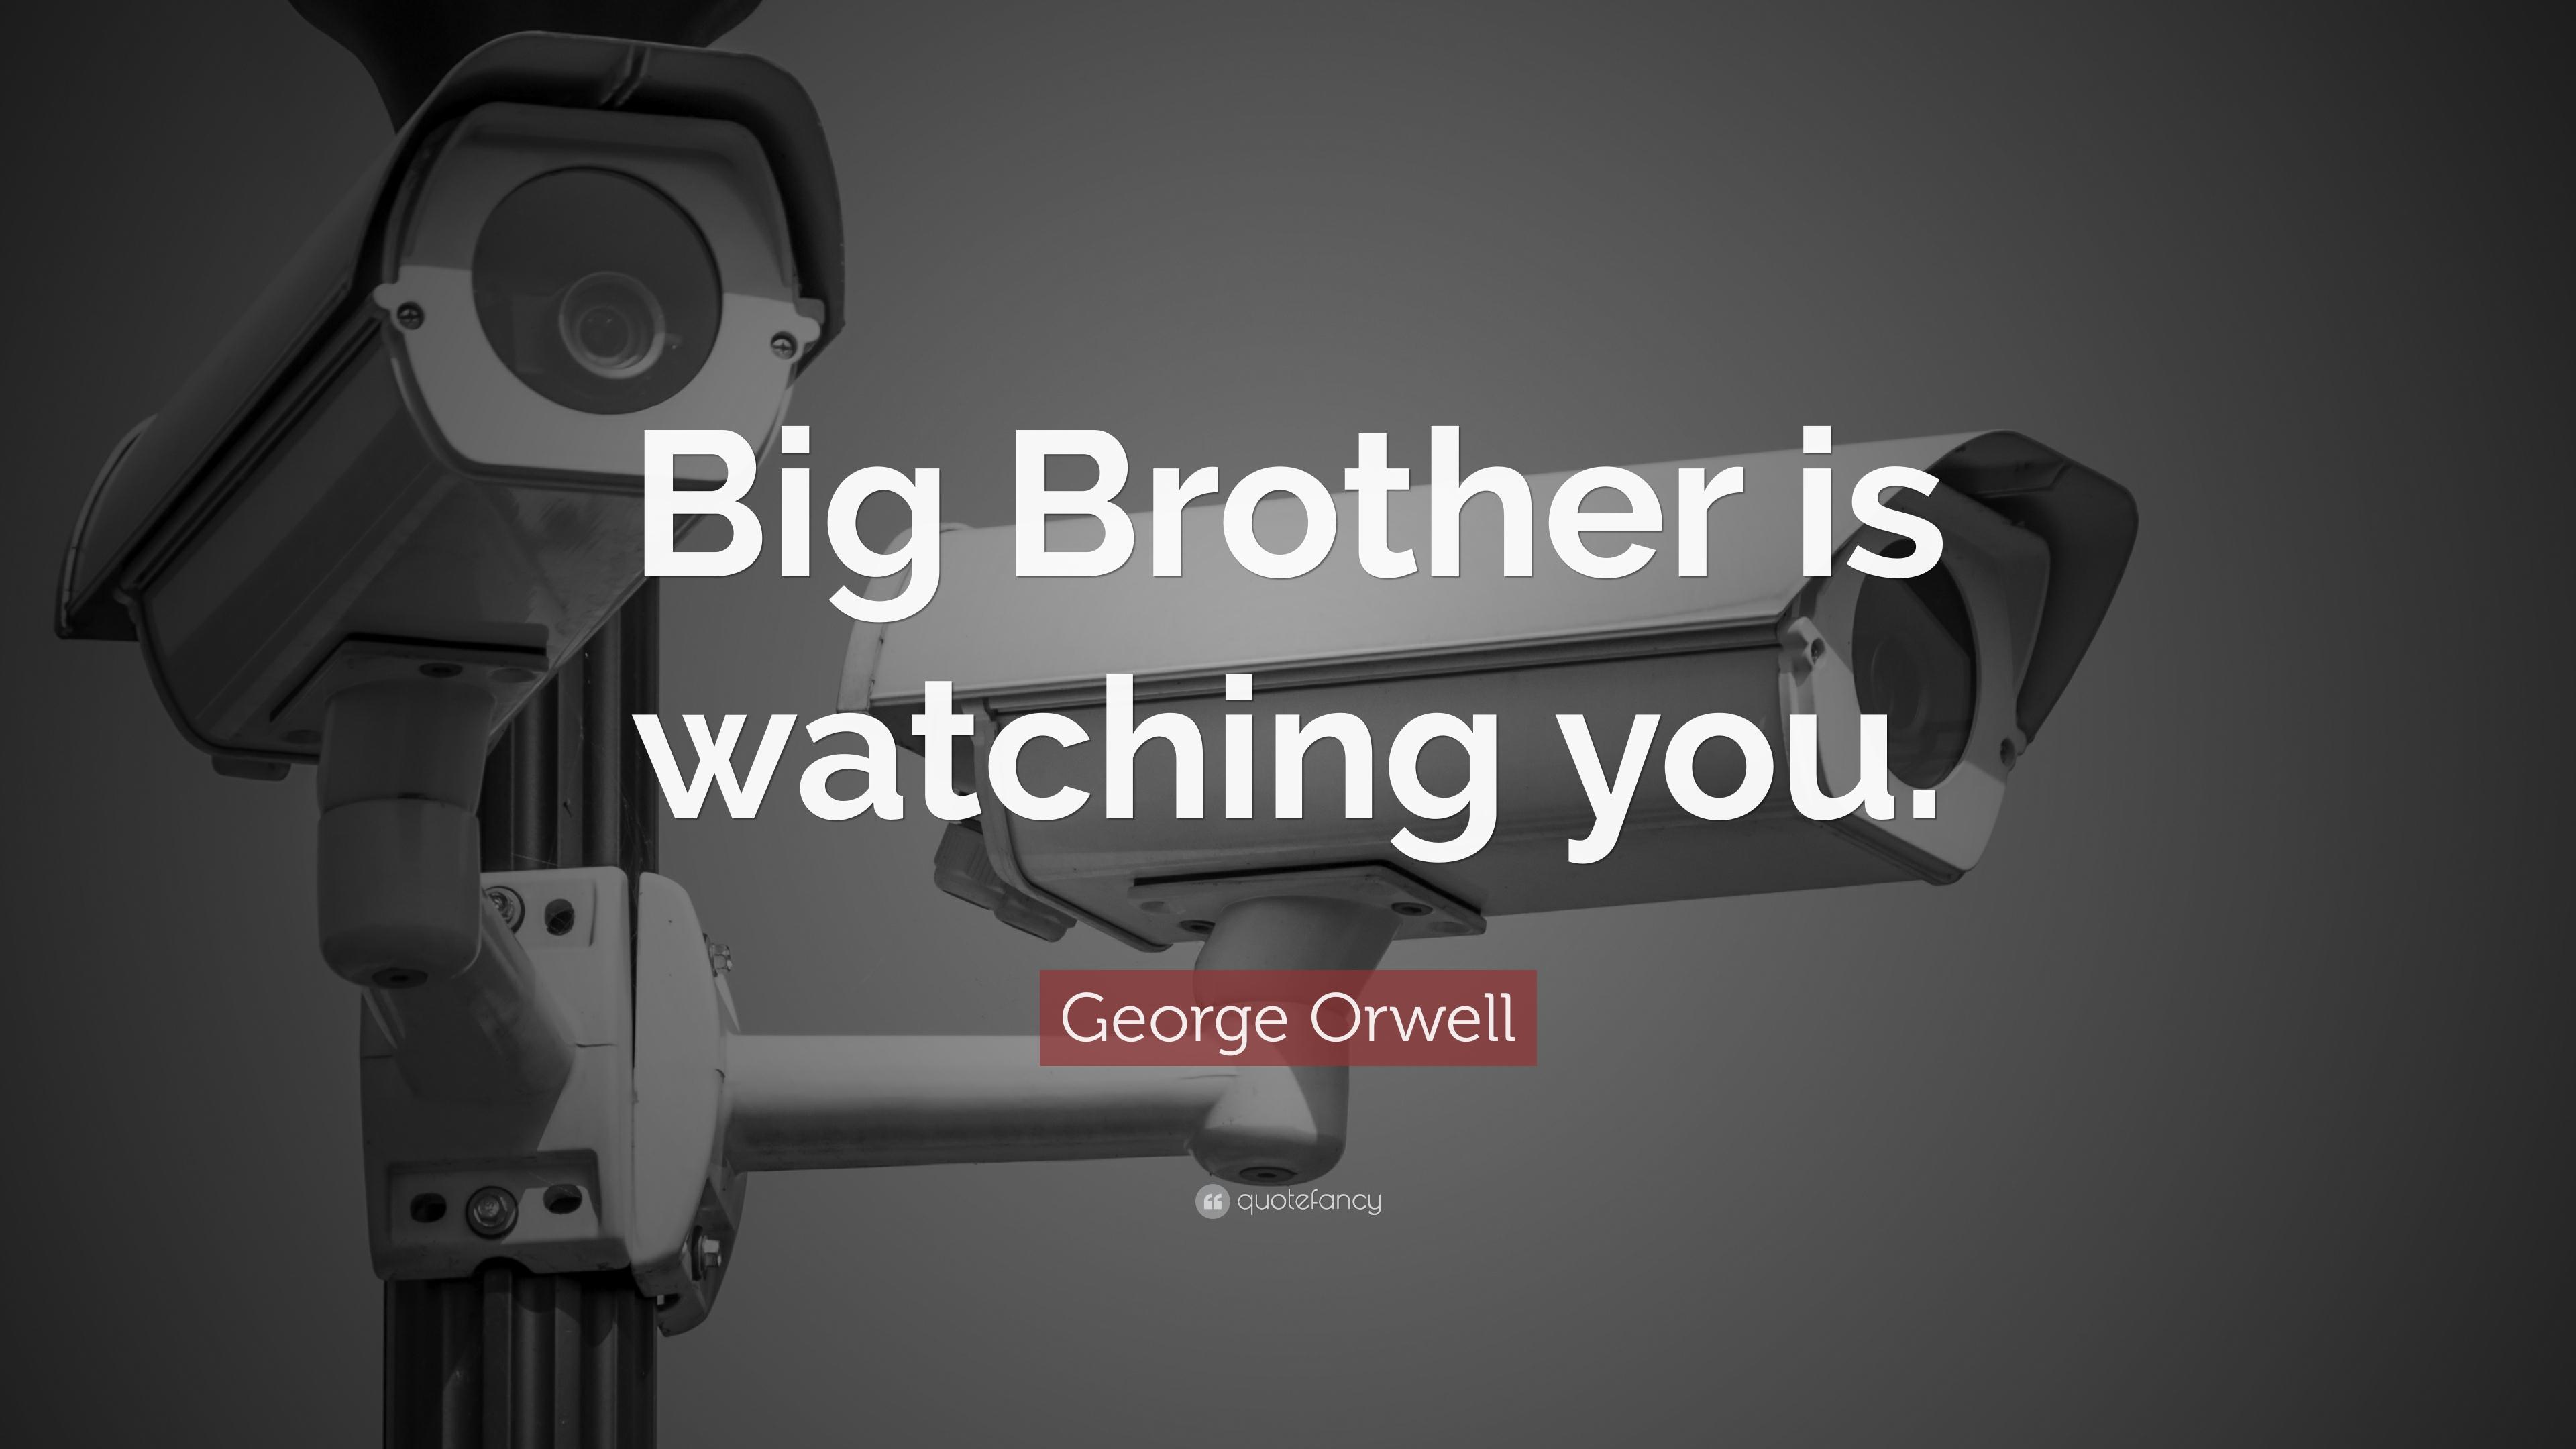 George Orwell Quote: “Big Brother is watching you.” (14 wallpaper)